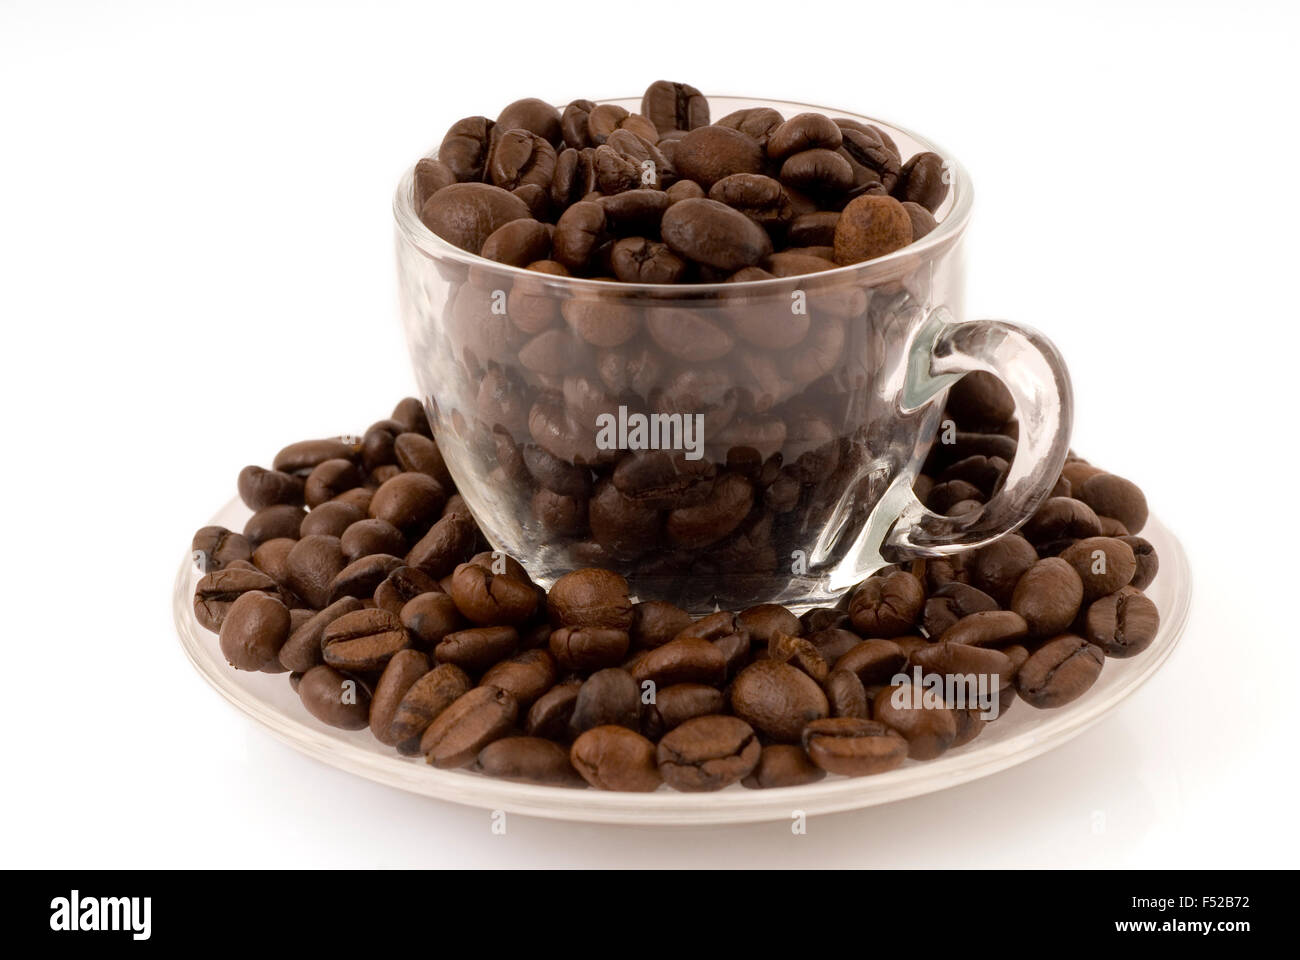 Espresso cup filled with coffee beans Stock Photo